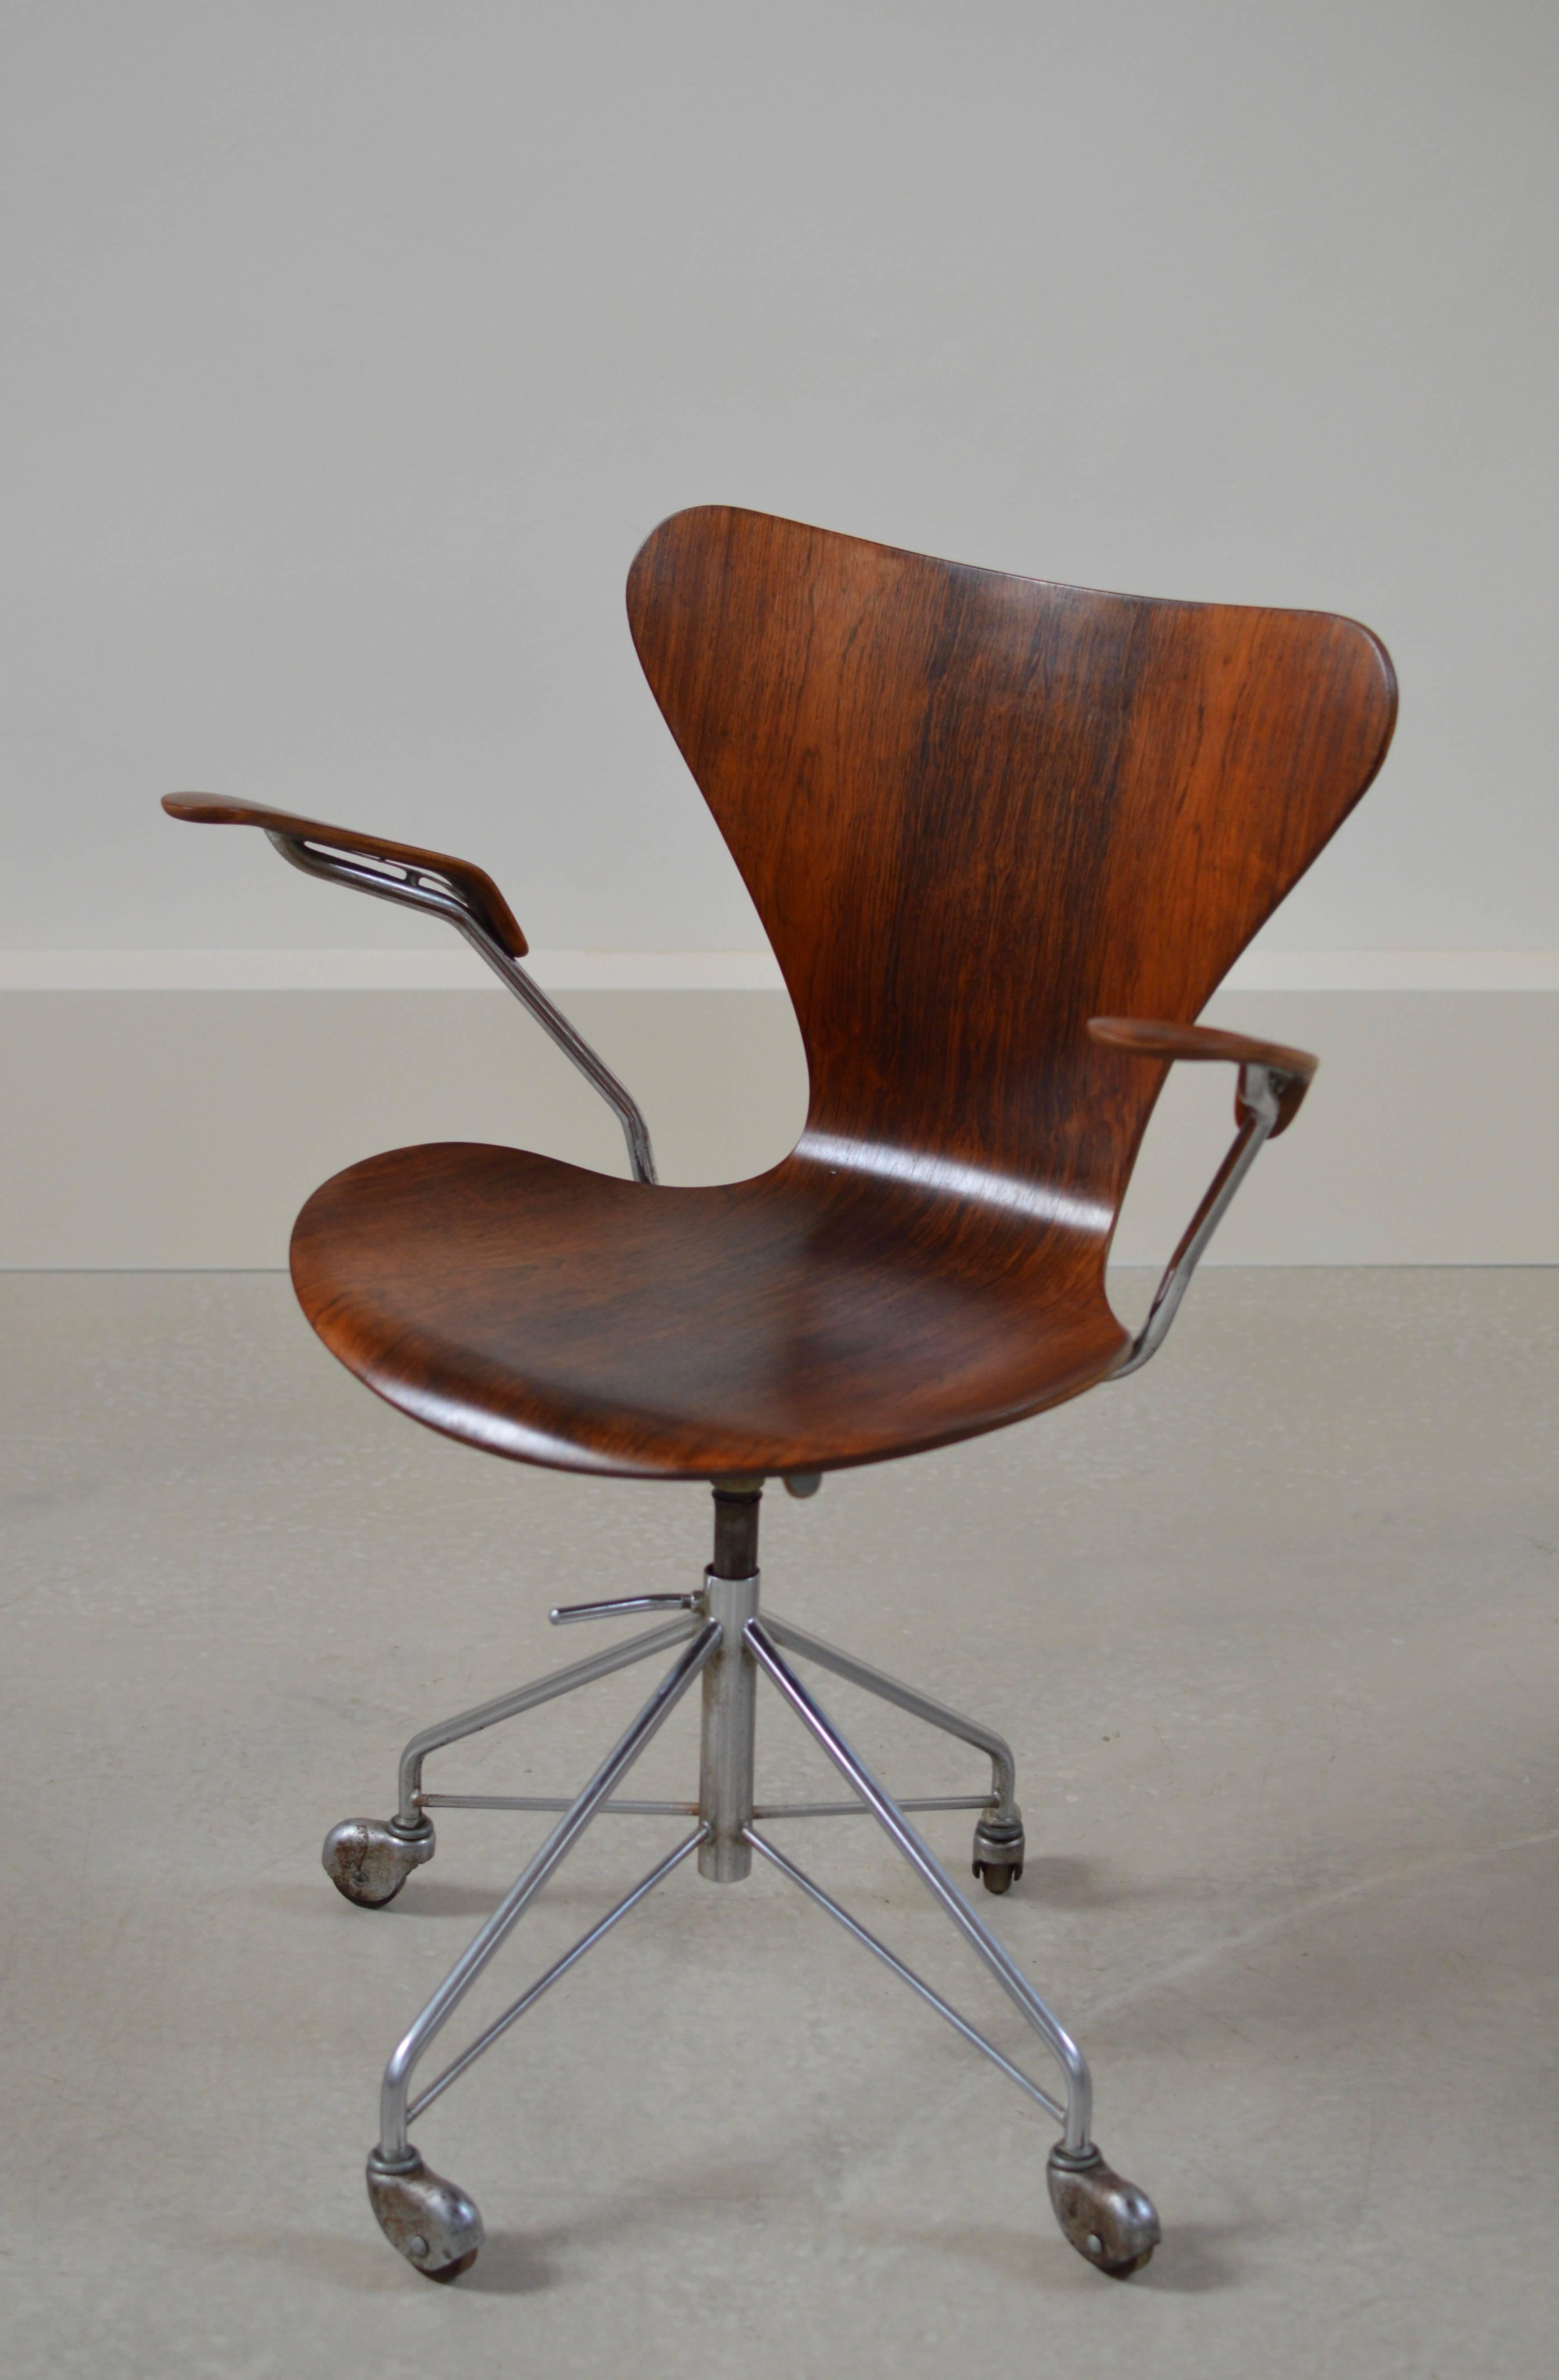 Ultra rare rosewood edition swivel desk chair with armrests, model 3217 with the first production type of base, a four swivel caster zinc finished base. The zinc finished bases are first production series and pre production to the later used chrome